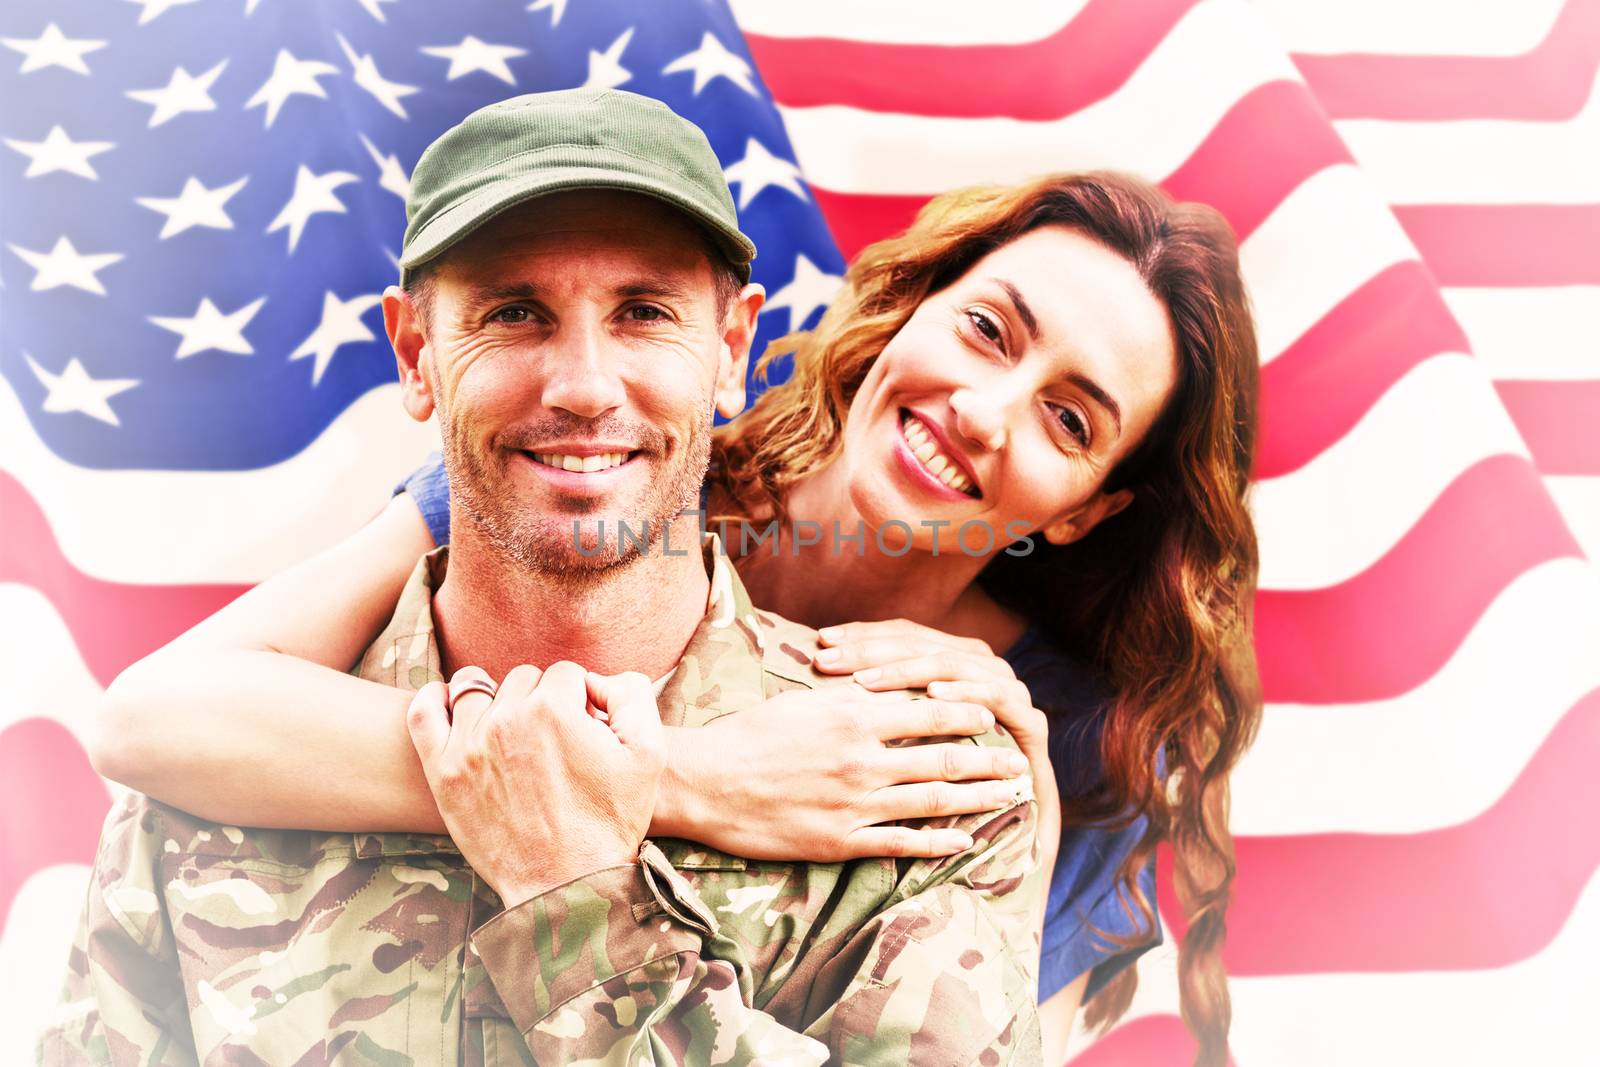 Composite image of soldier reunited with partner by Wavebreakmedia